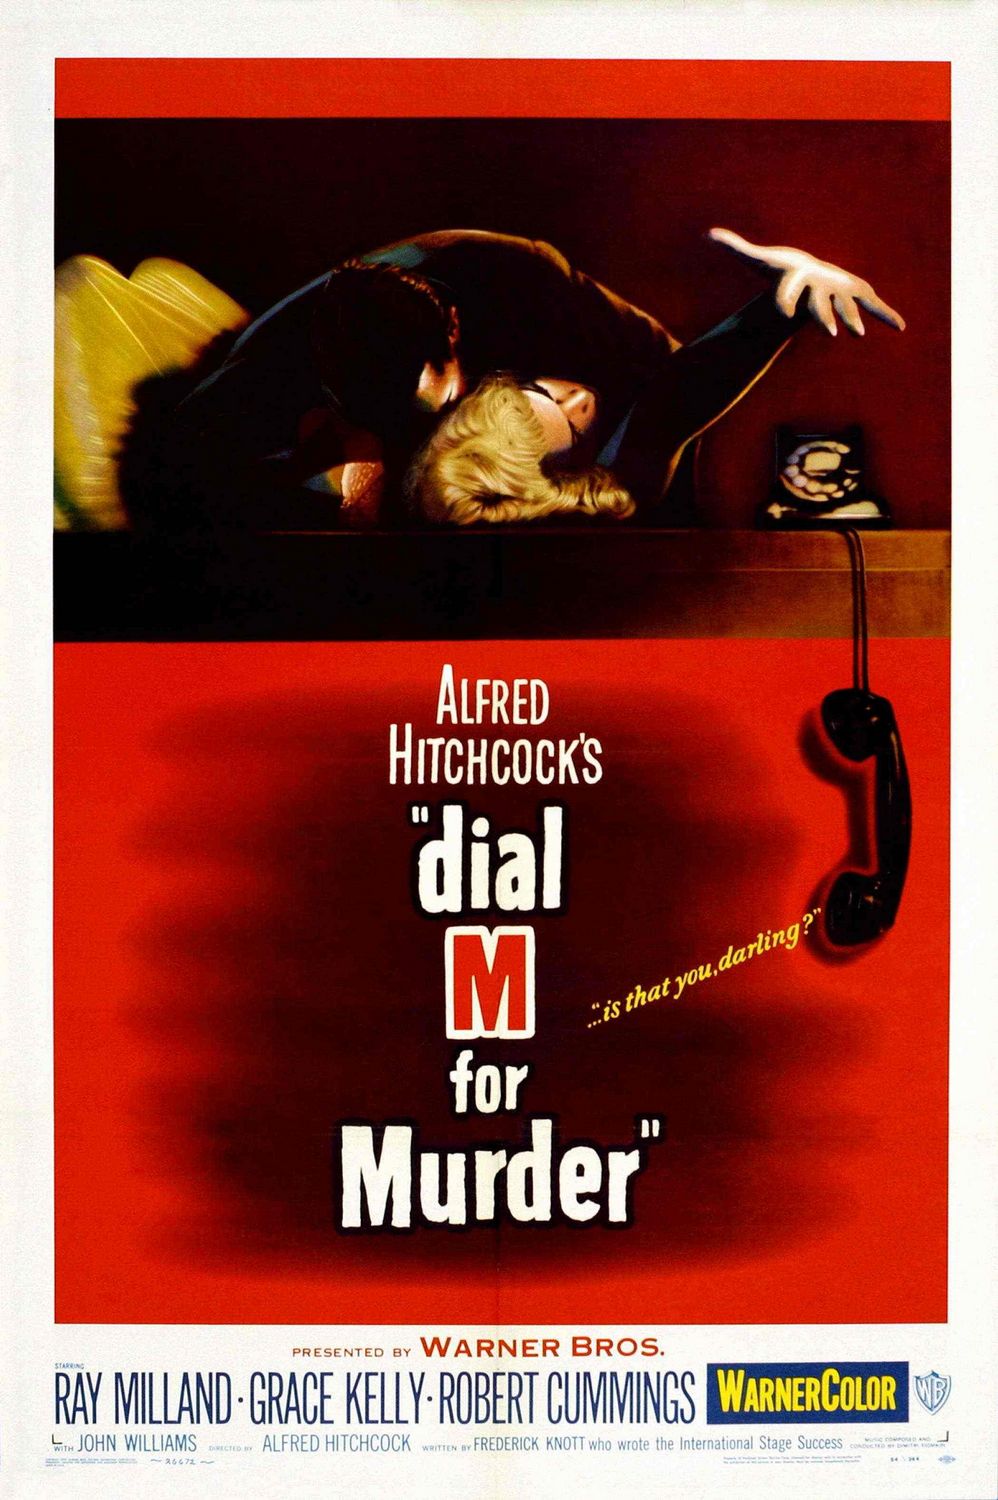 Dial M for Murder - Wikipedia